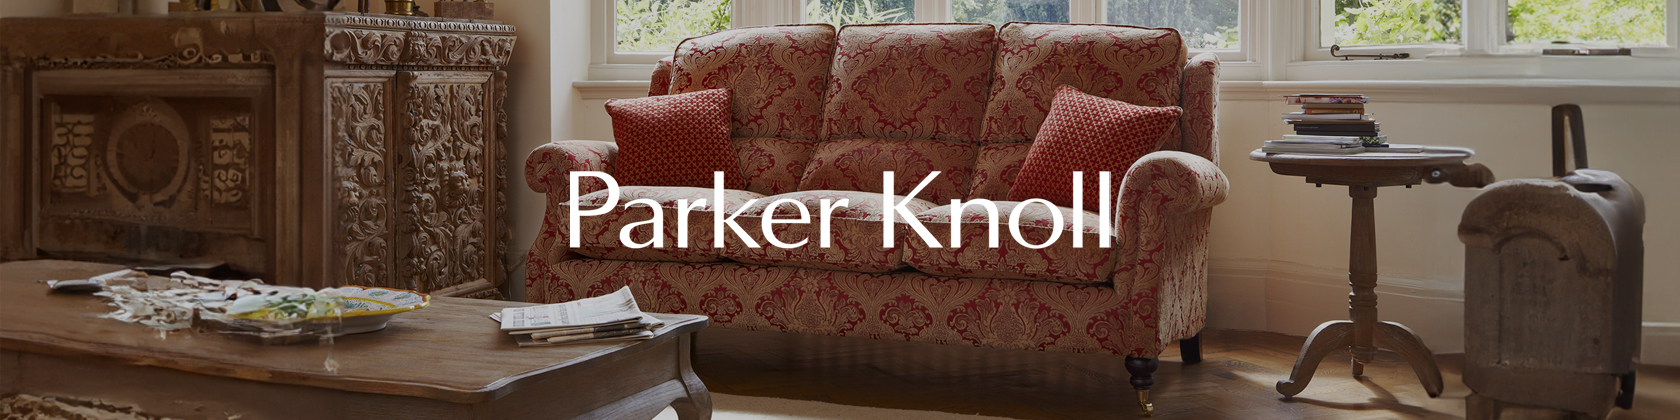 parker and knoll banner